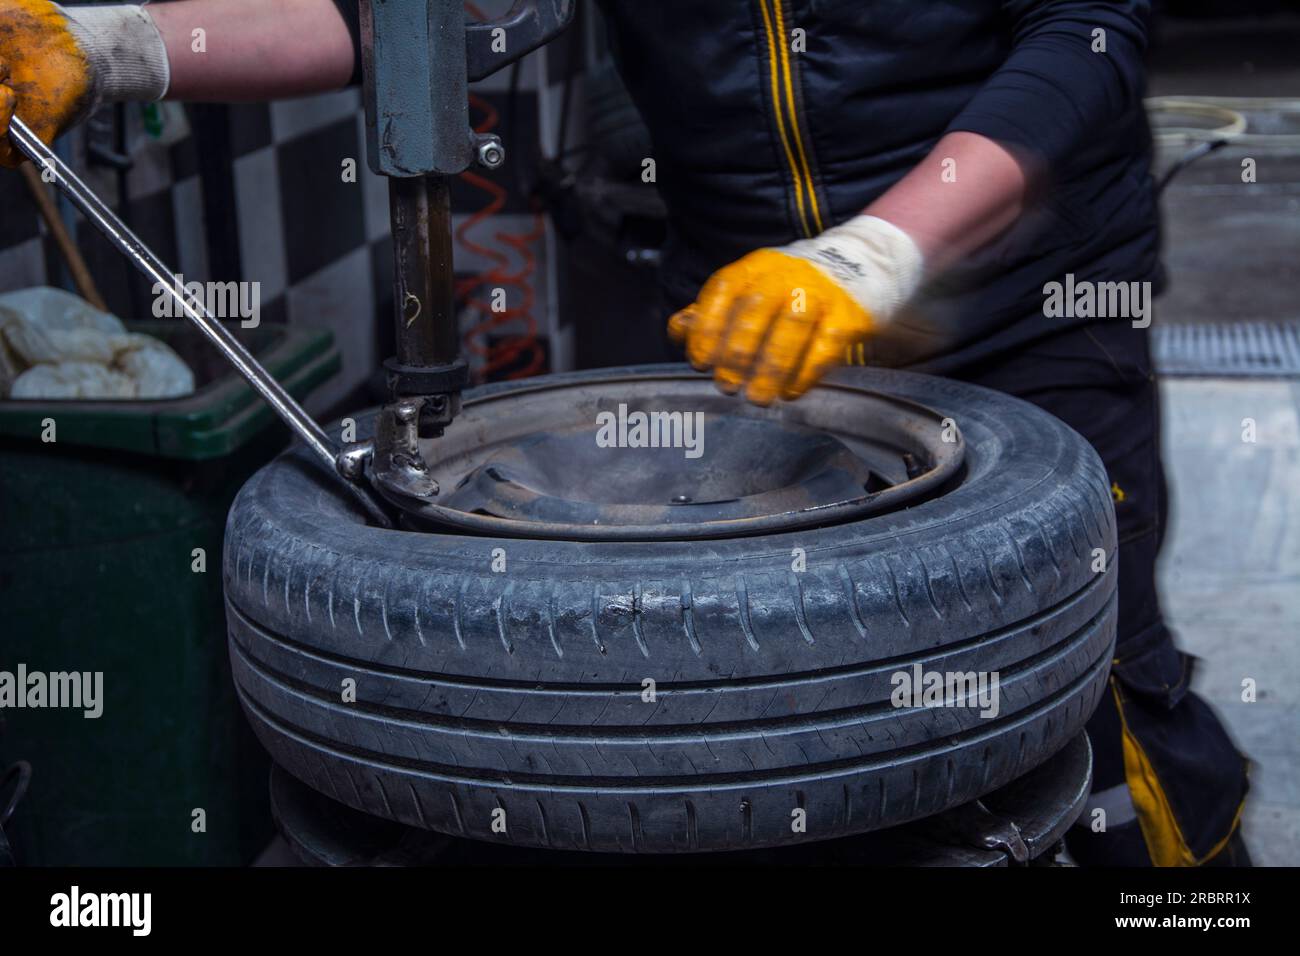 Unrecognizable man separating tire from rim Stock Photo